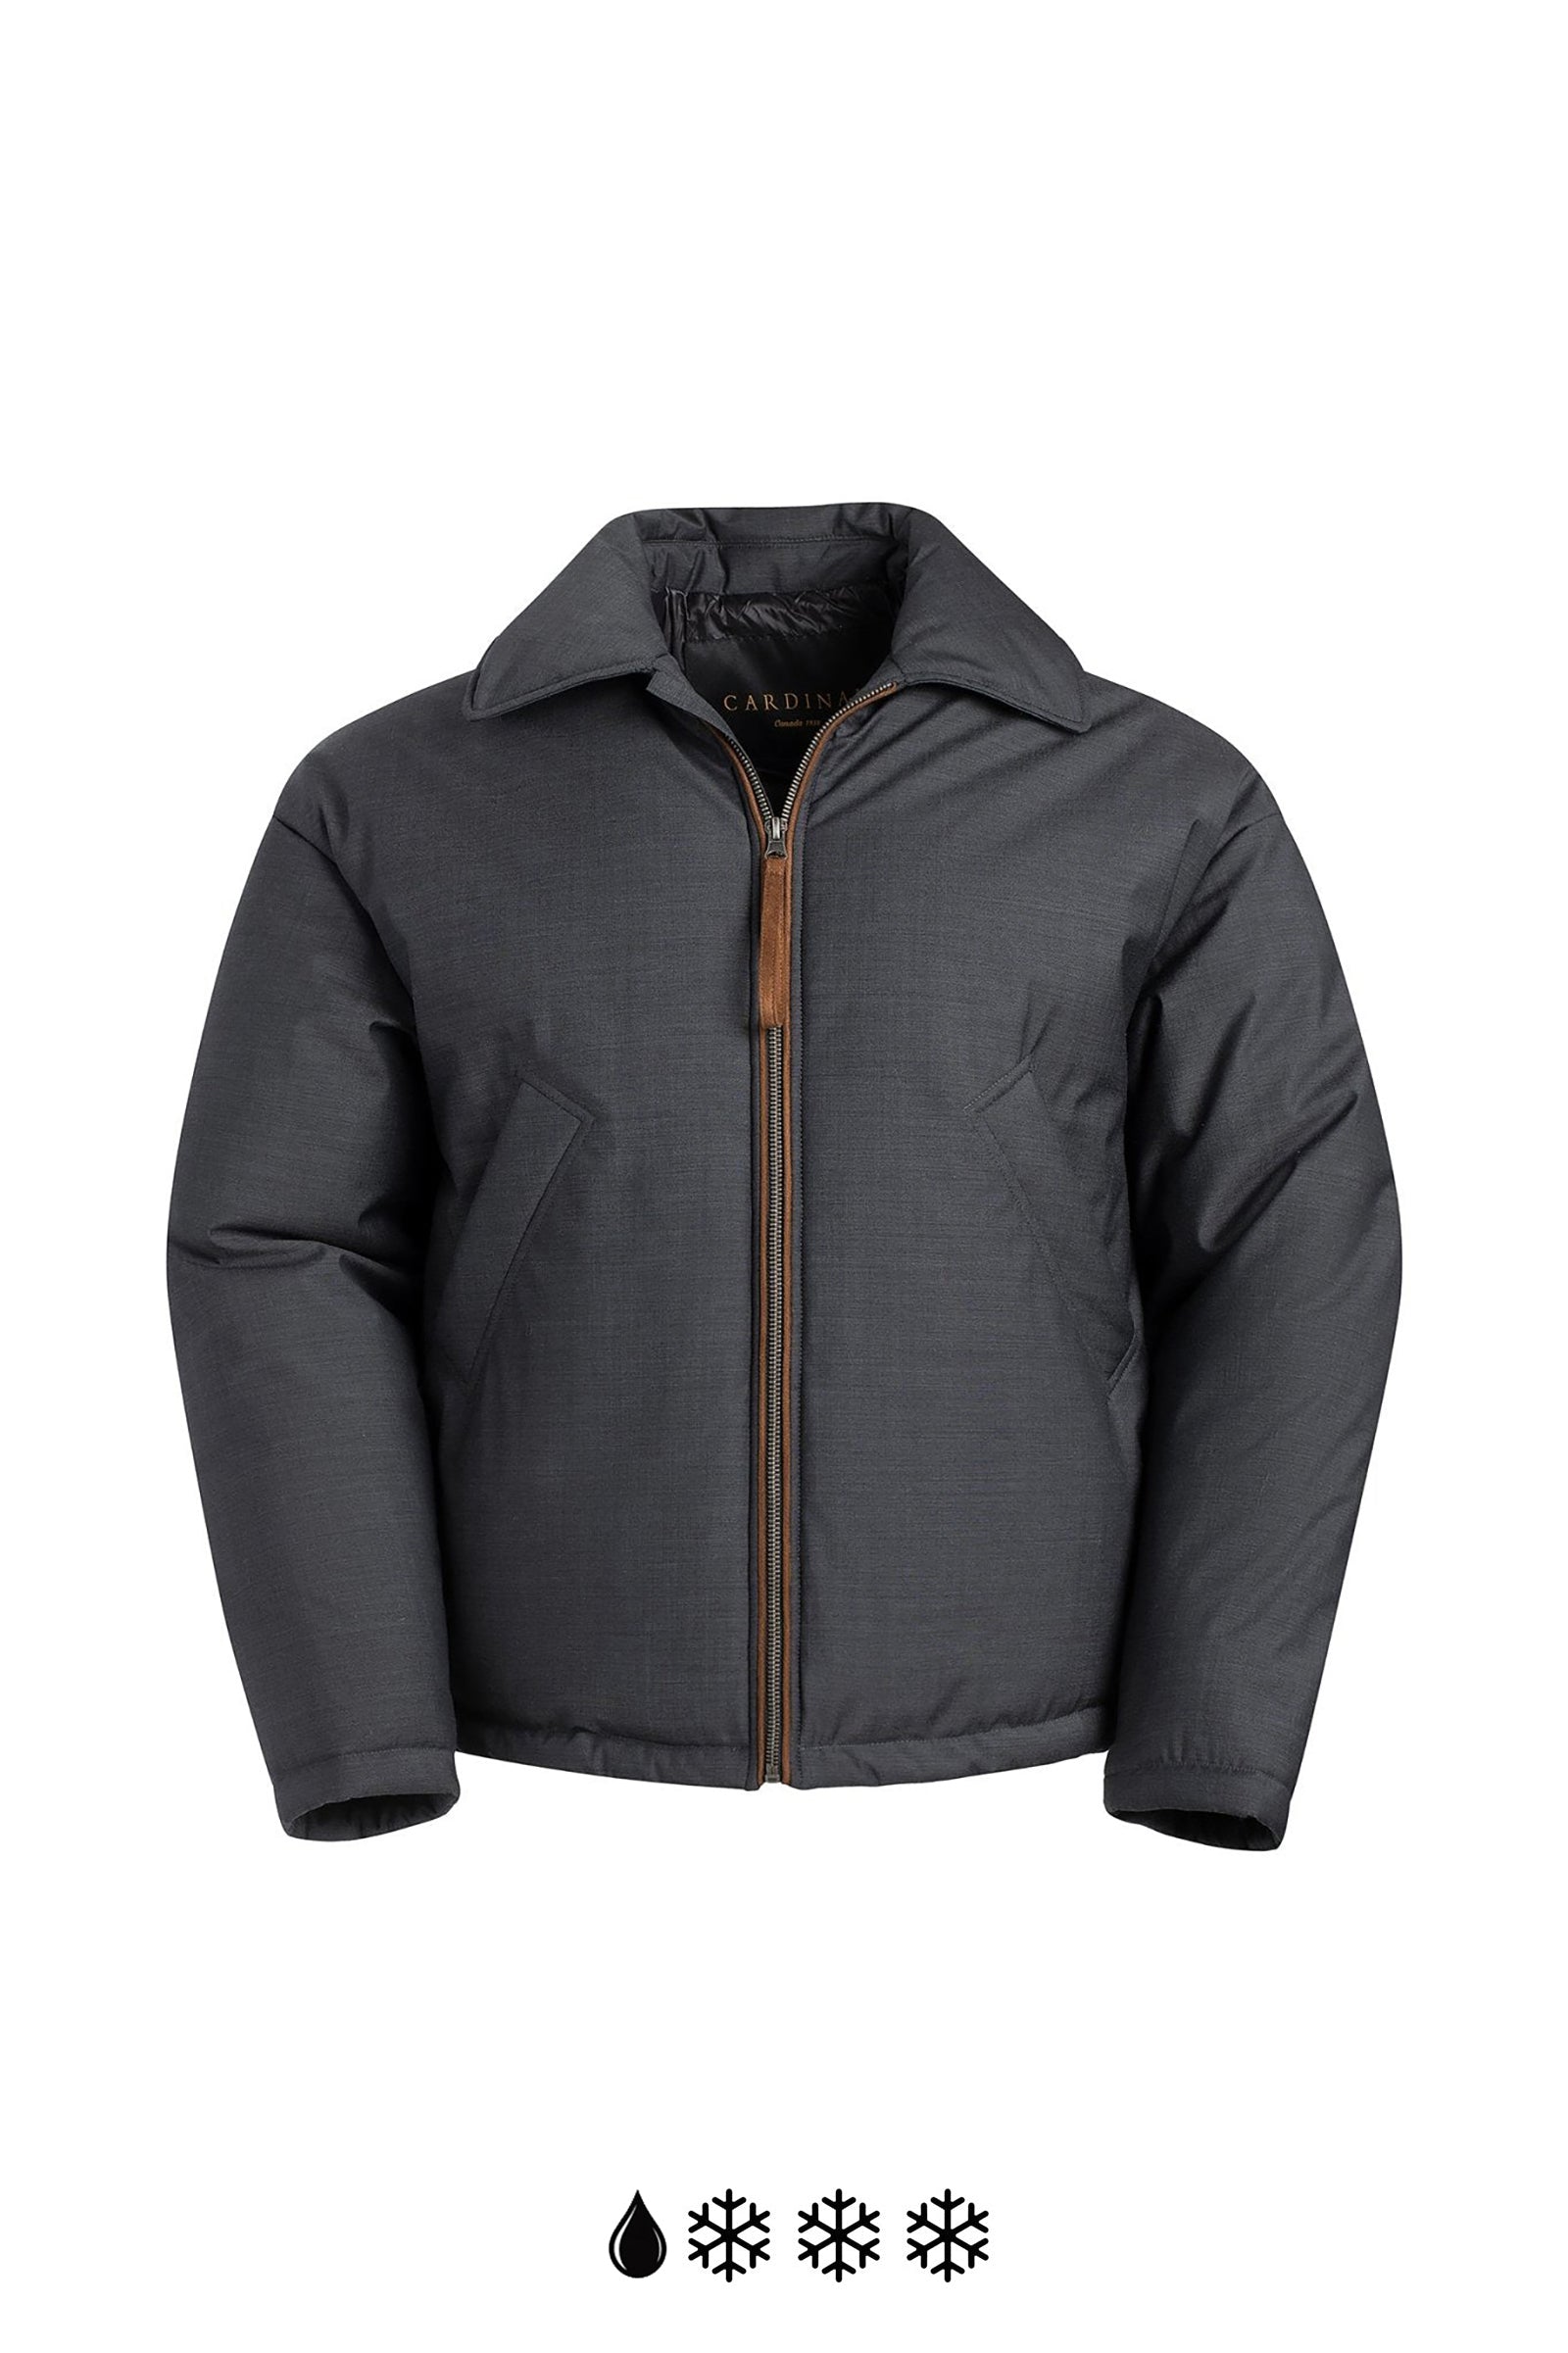 BARTON CHARCOAL WOOL SHORT BOMBER WITH PRIMALOFT LINING